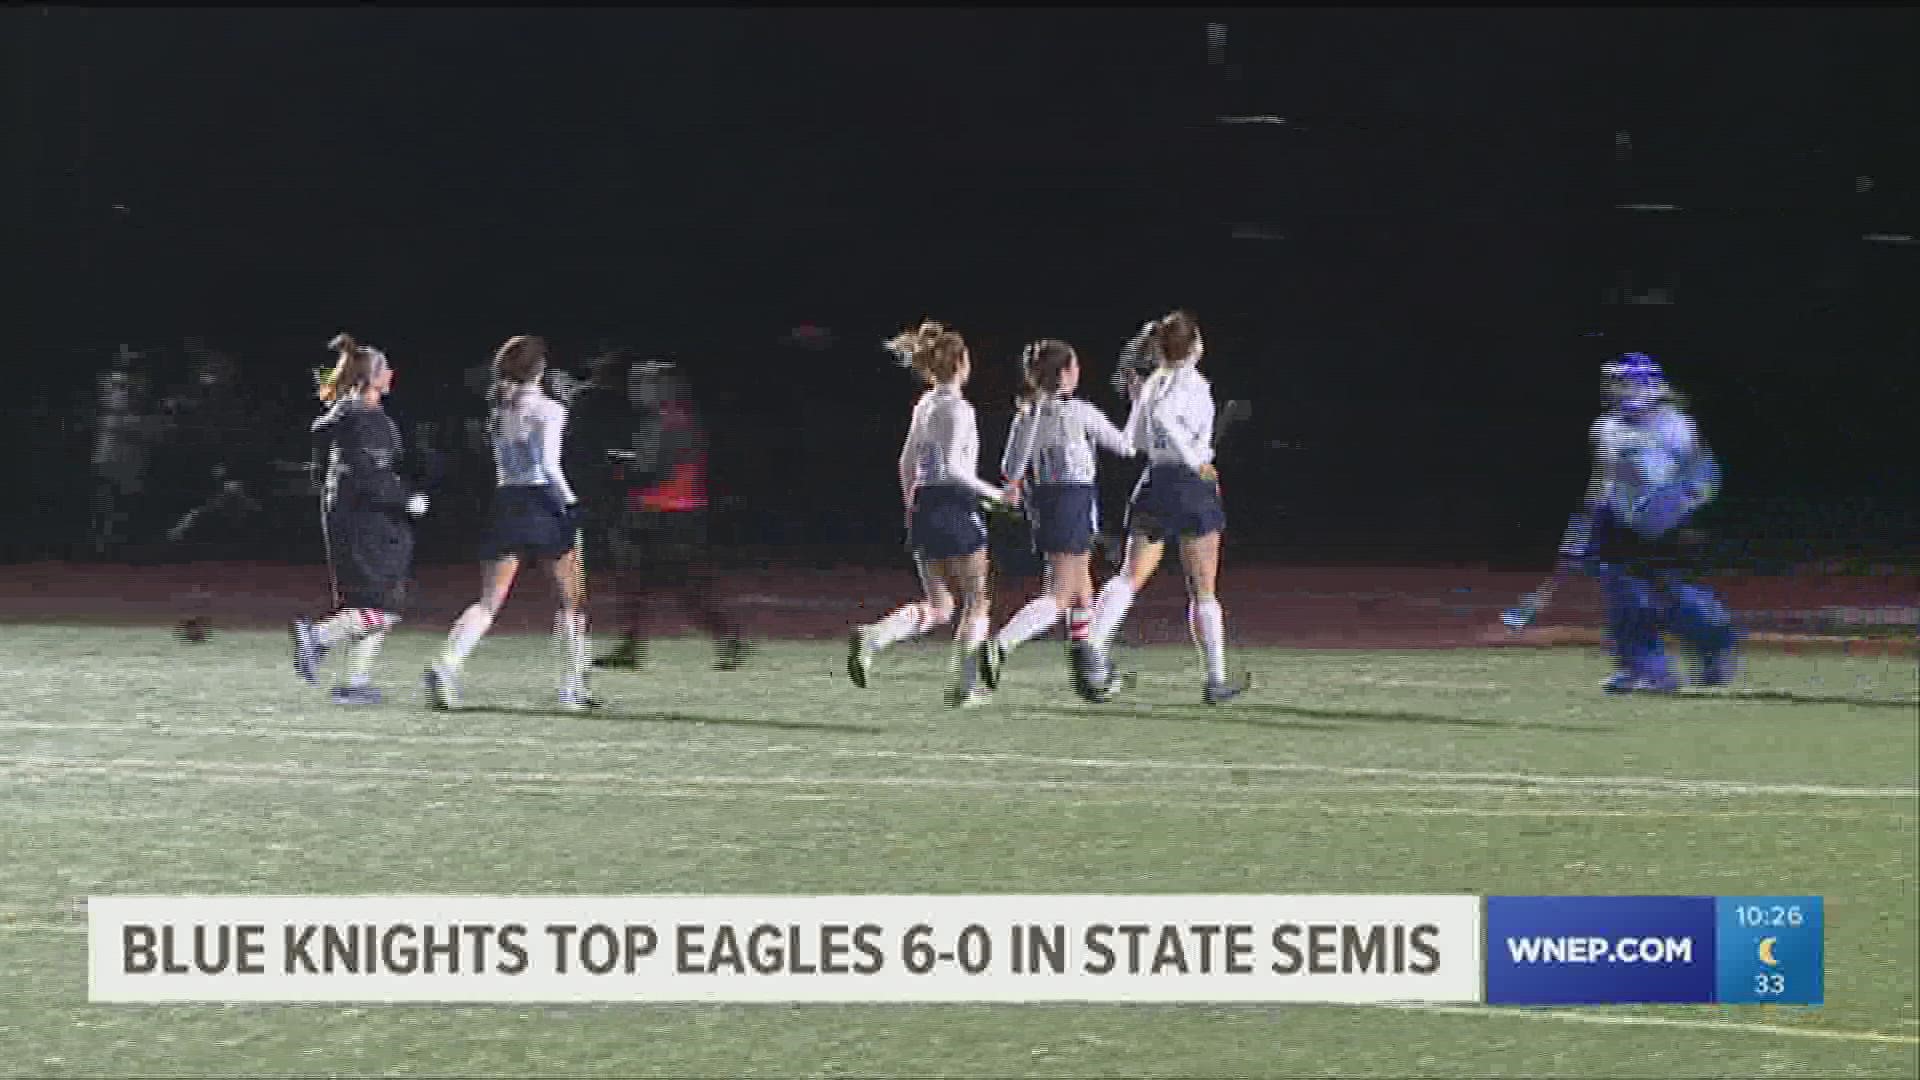 Wyoming Seminary whipped Line Mountain 6-0 in the 'A' Field Hockey State semi-finals.